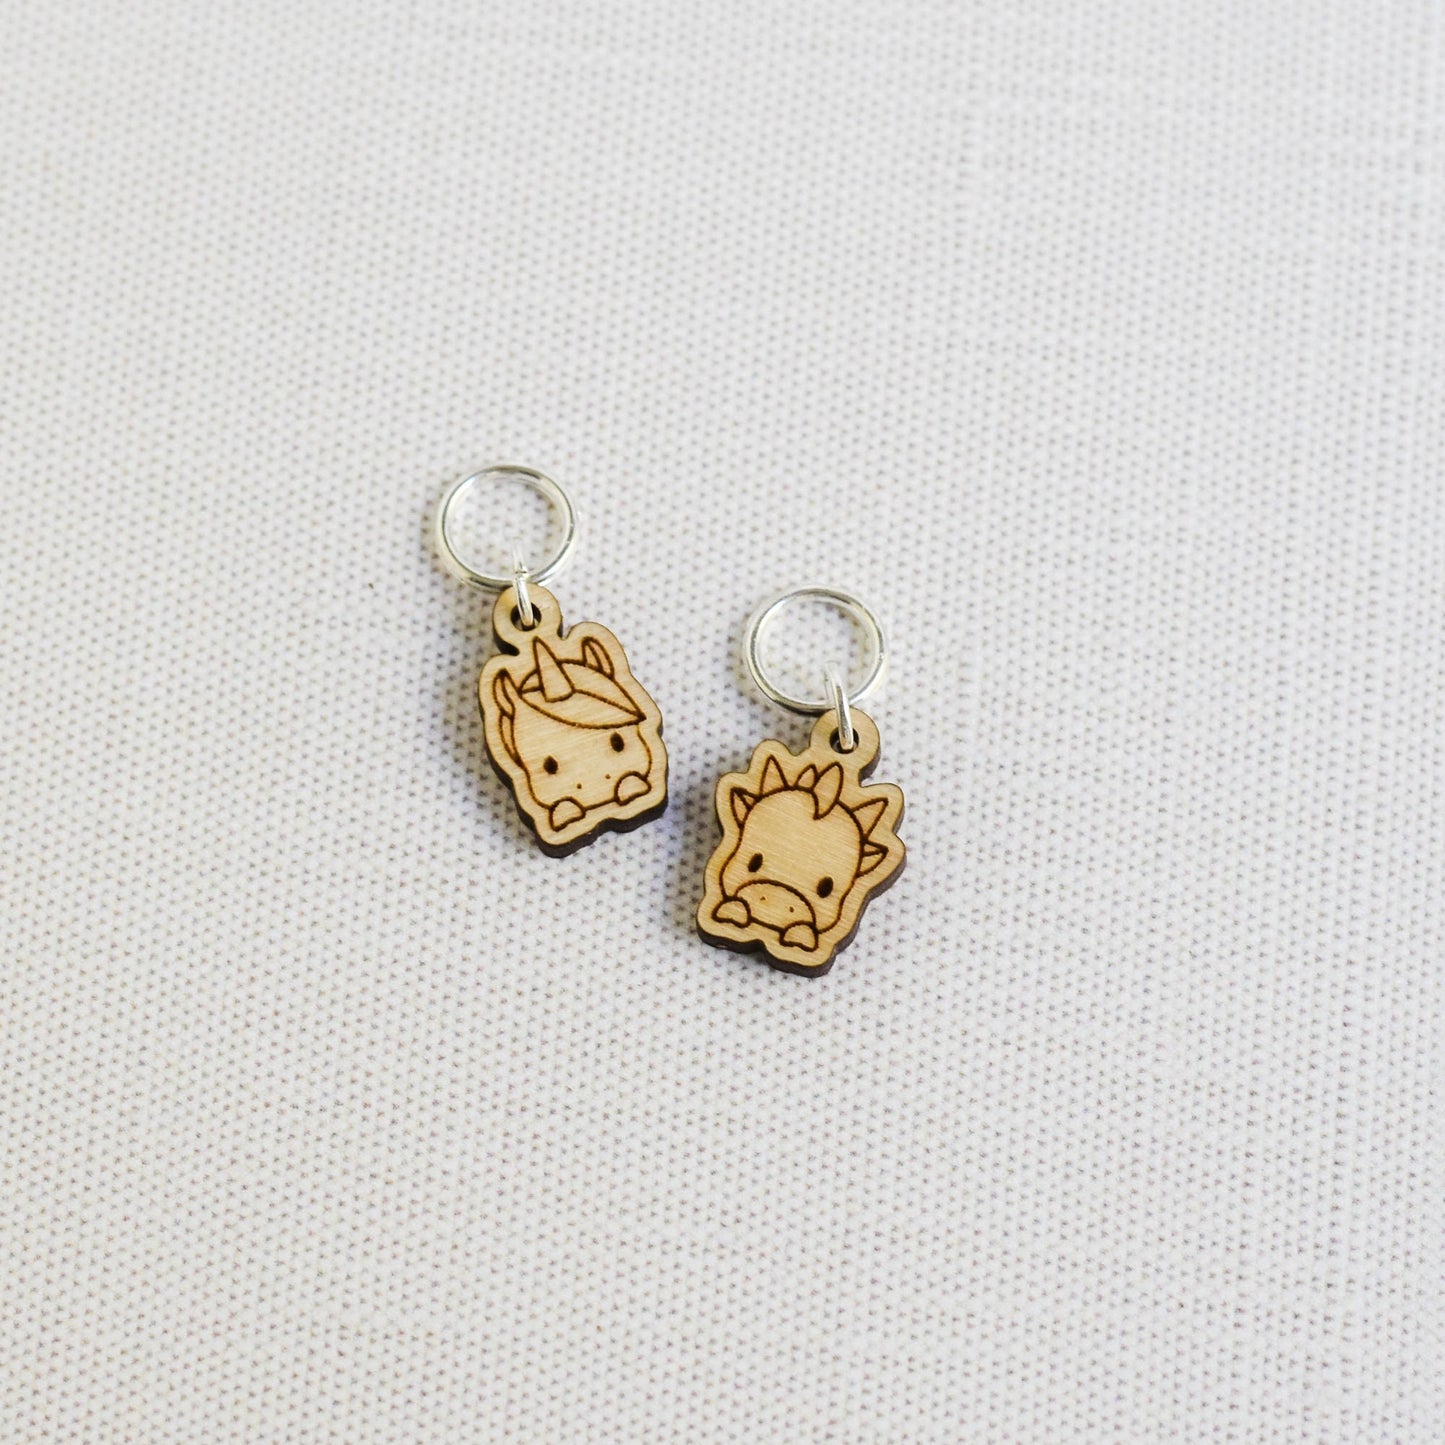 Set of 2 Laser Engraved Stitch Markers - Baby Unicorn and Dragon